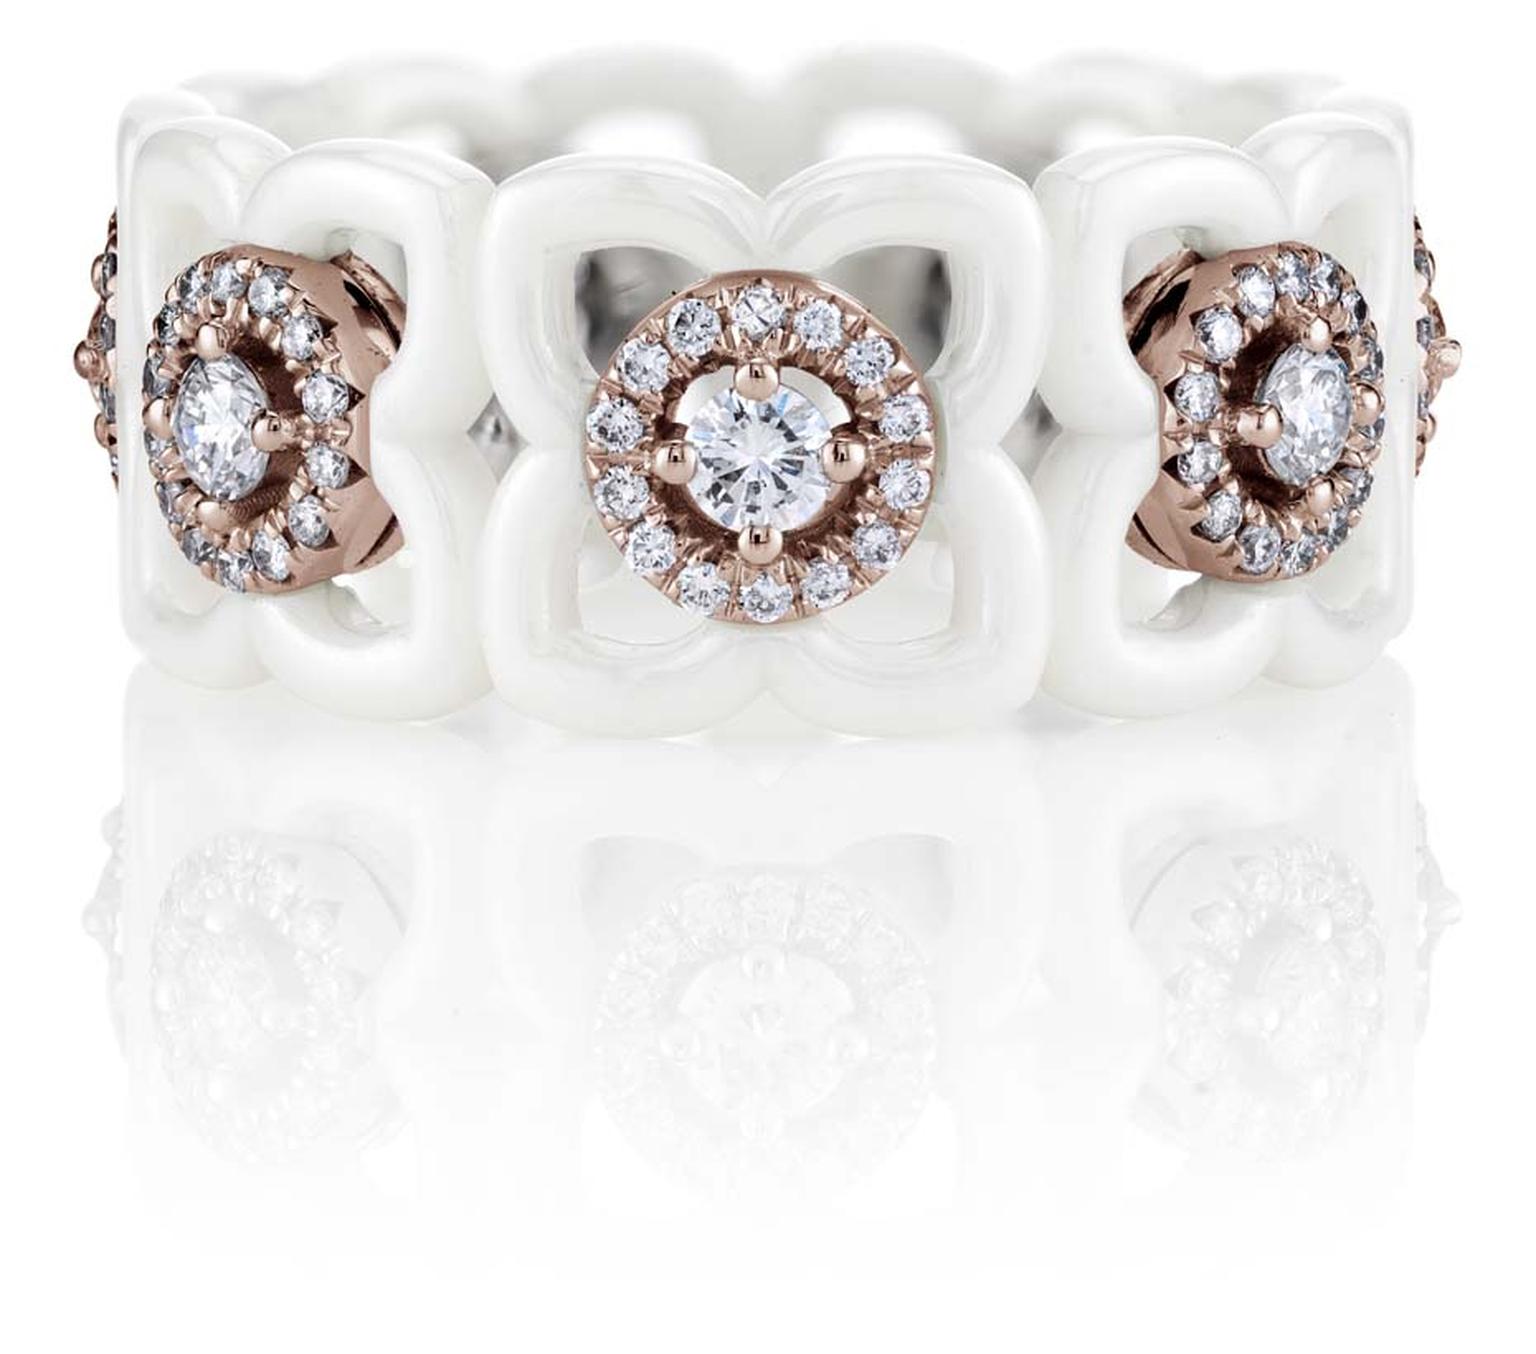 De Beers Enchanted Lotus Daylight ring featuring white ceramic, pink gold and round diamonds.